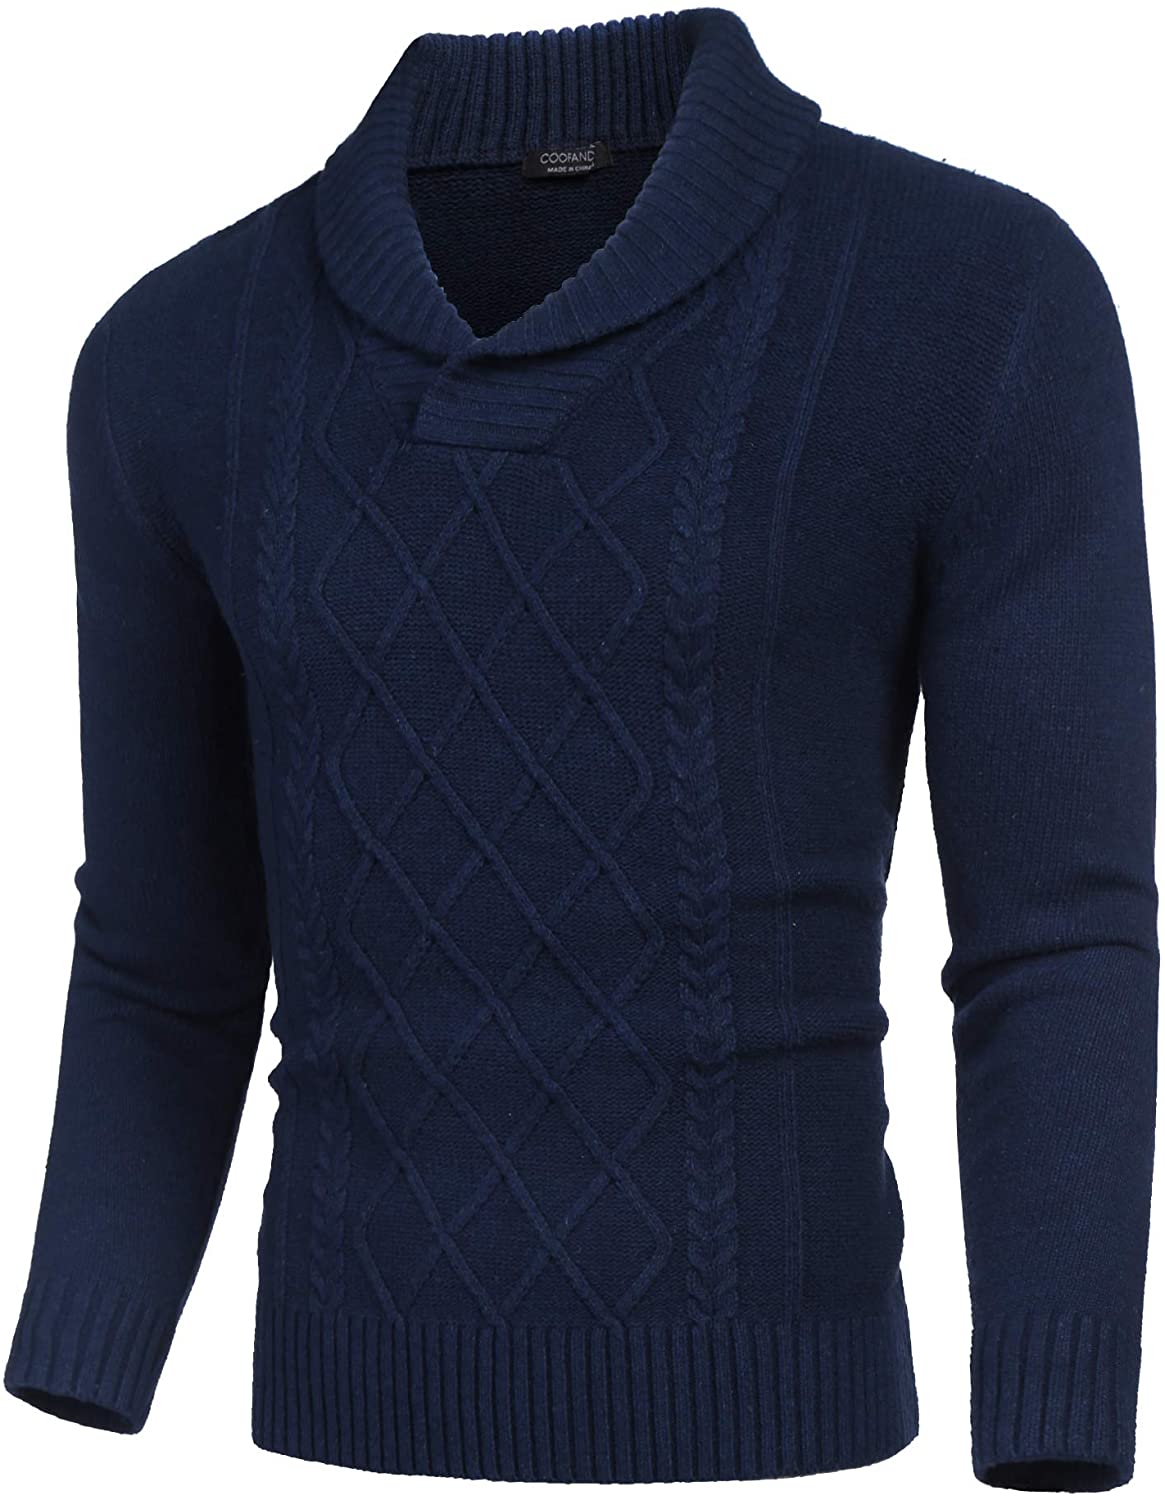 COOFANDY Men's Shawl Collar Sweaters V-Neck Cotton Relaxed Fit Cable